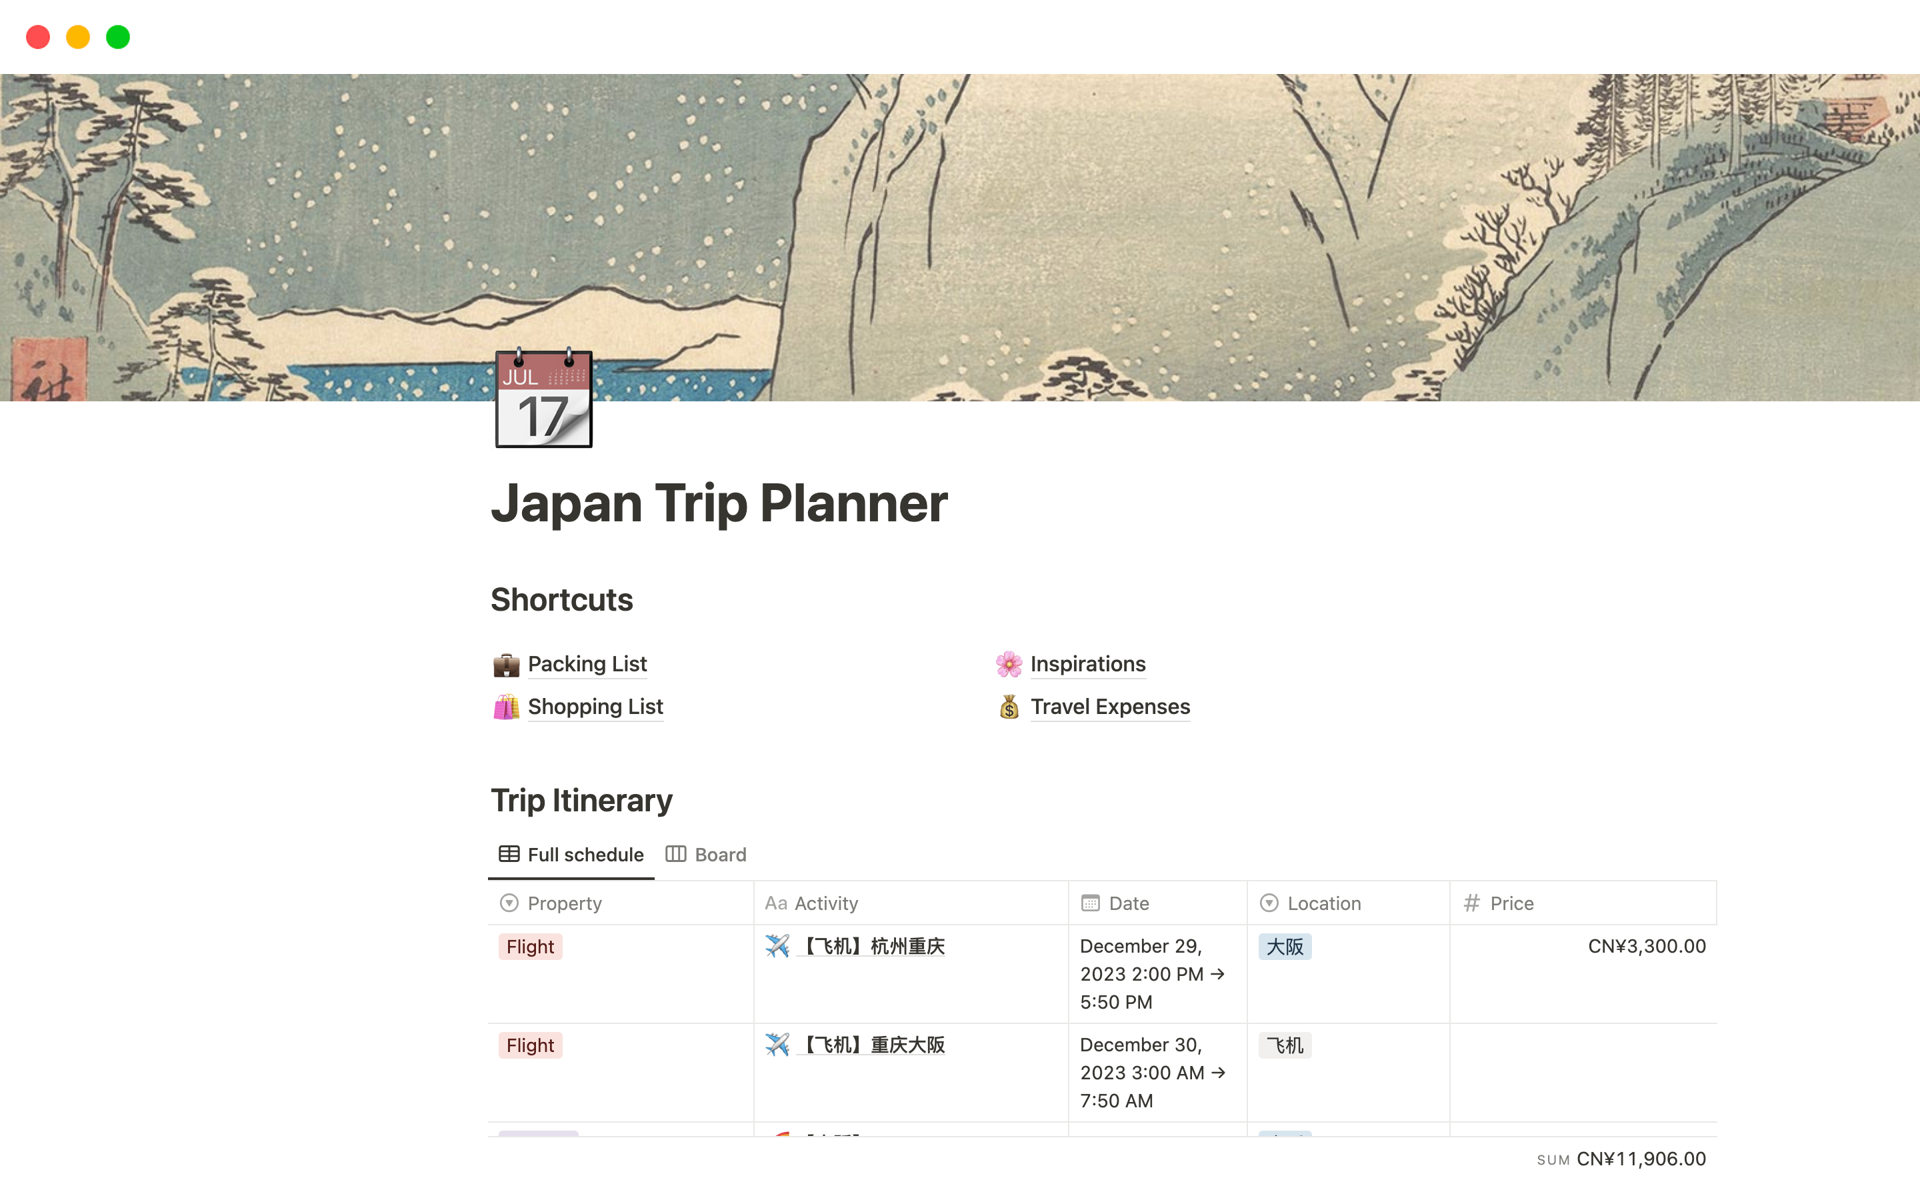 Handy lightweighted Template for trip planning. 